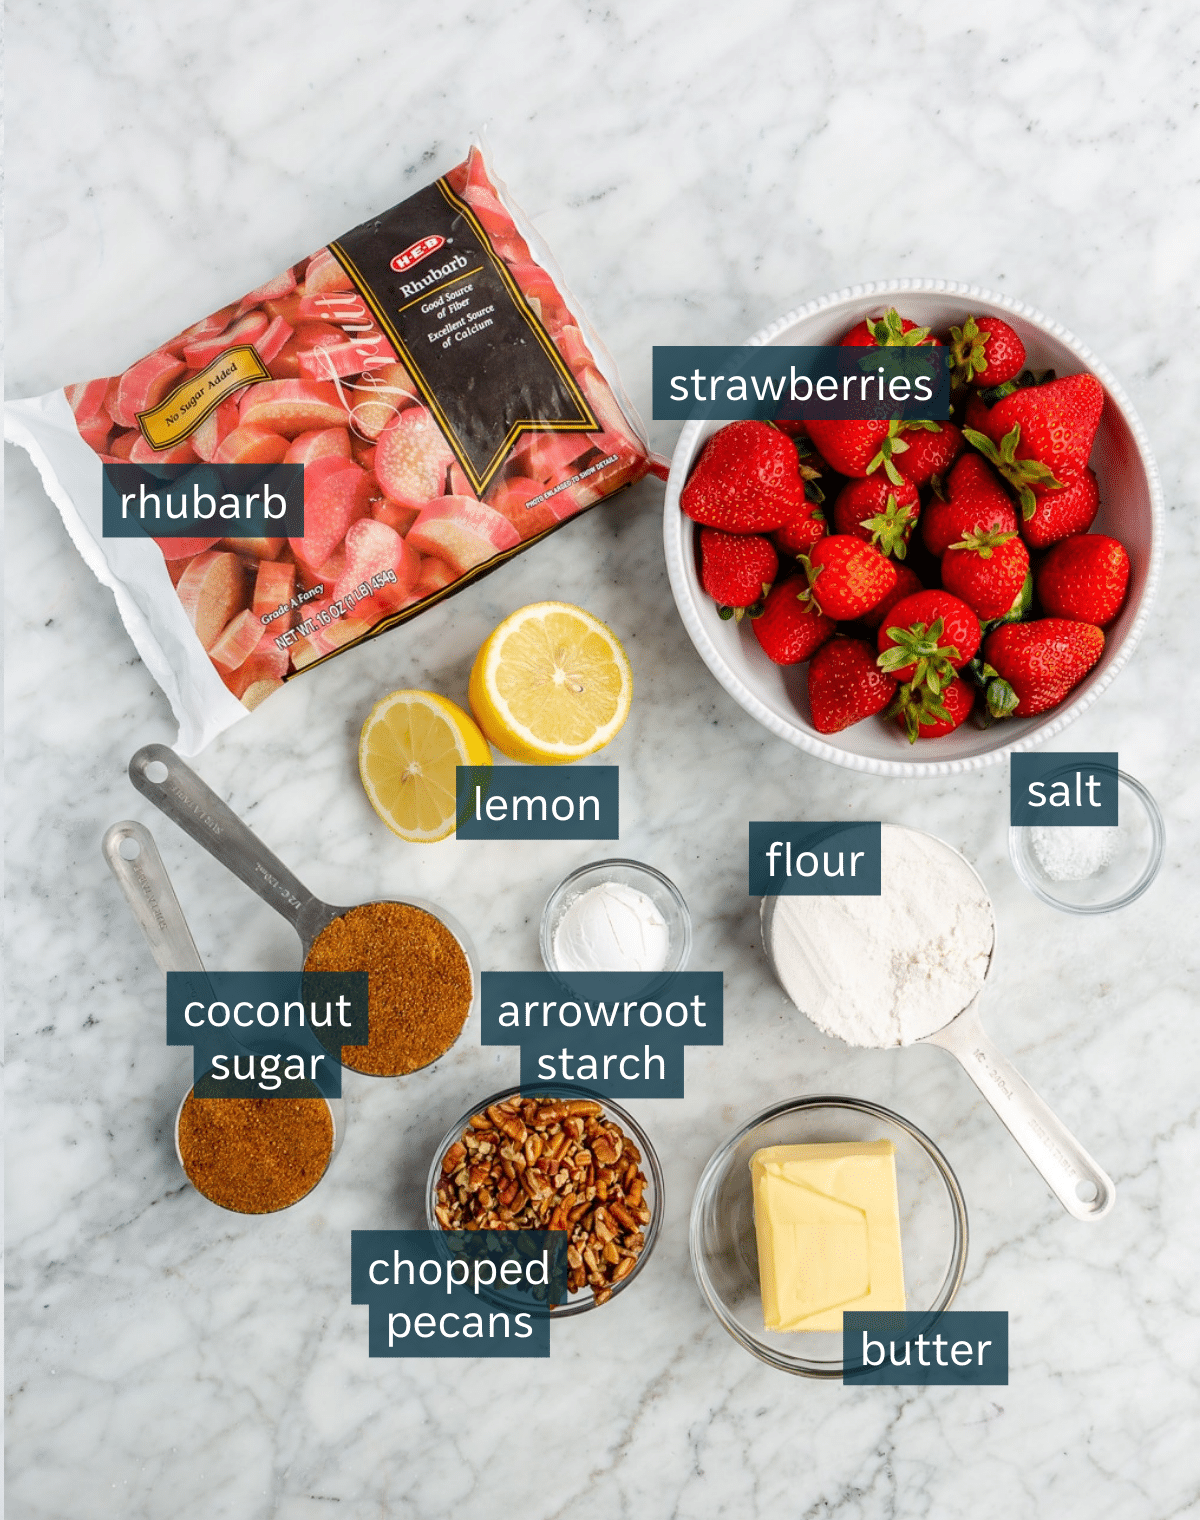 Ingredients for strawberry rhubarb crisp sit in a variety of bowls and measuring cups on a marble countertop.